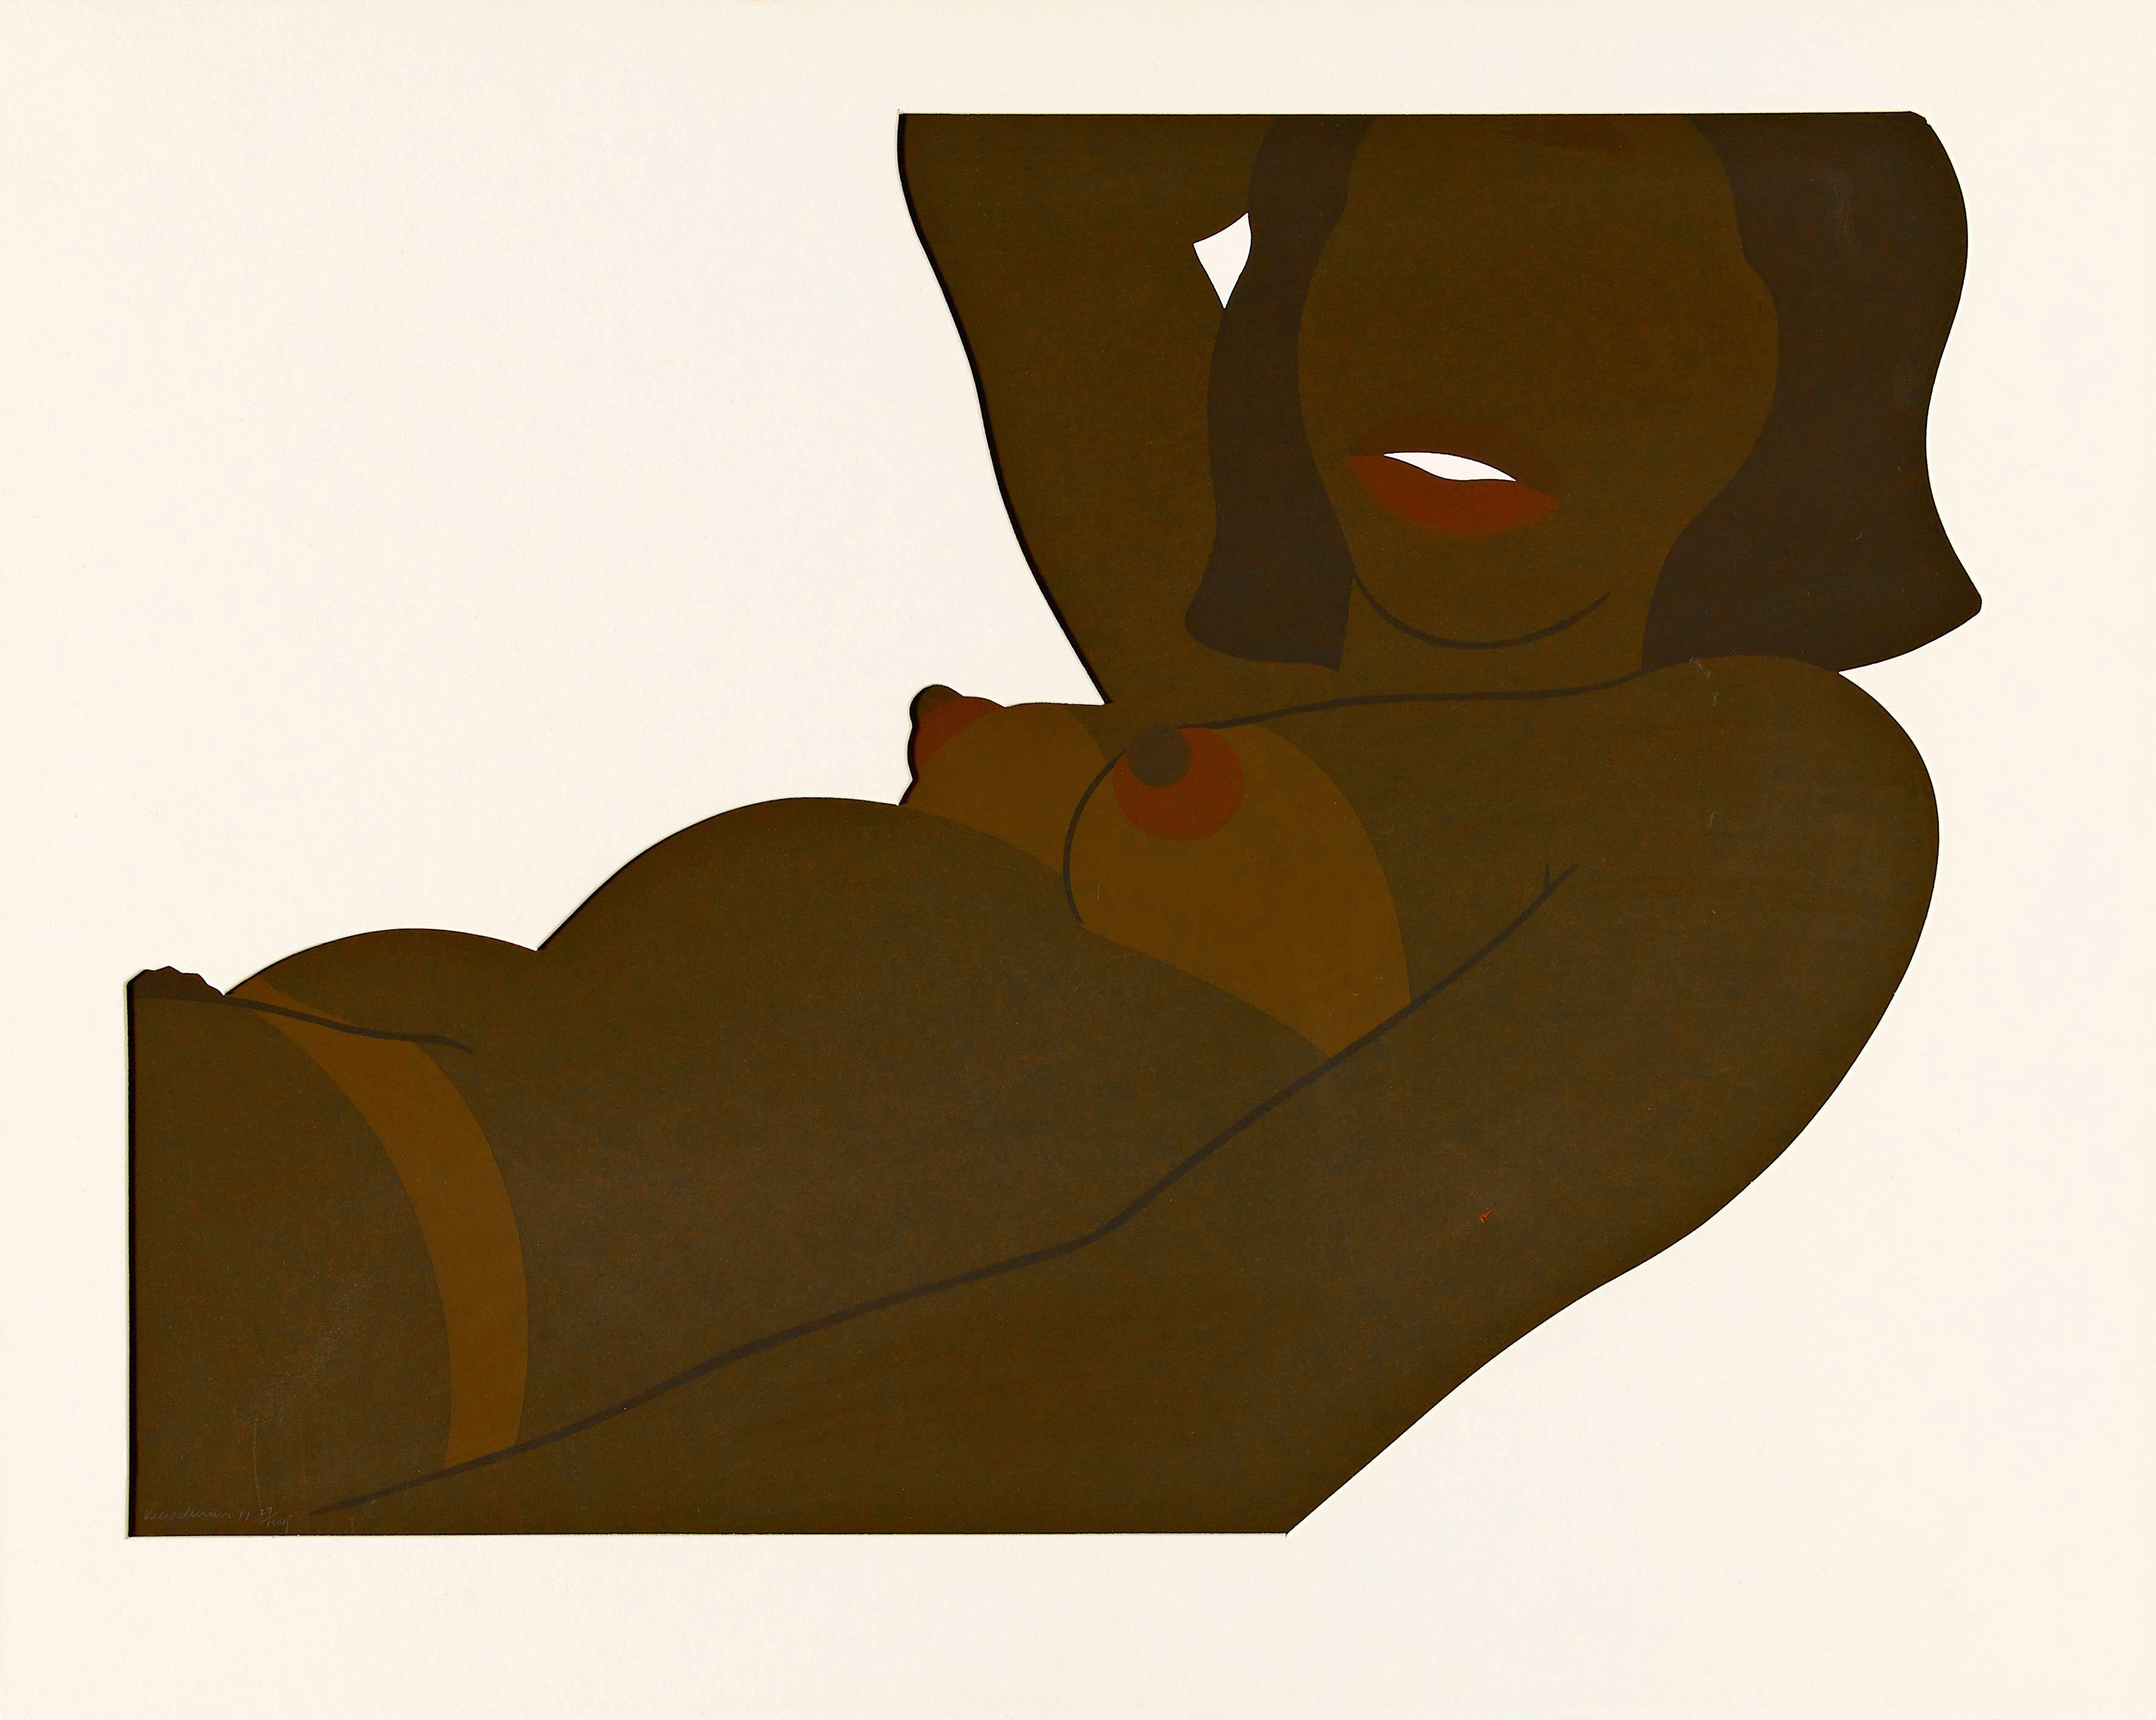 TOM WESSELMANN (1931-2004)
Great American brown nude cut out
1971
Color serigraph on museum board 
40 x 50 cm
15.75 x 19.69 inches
Number 27 of 100